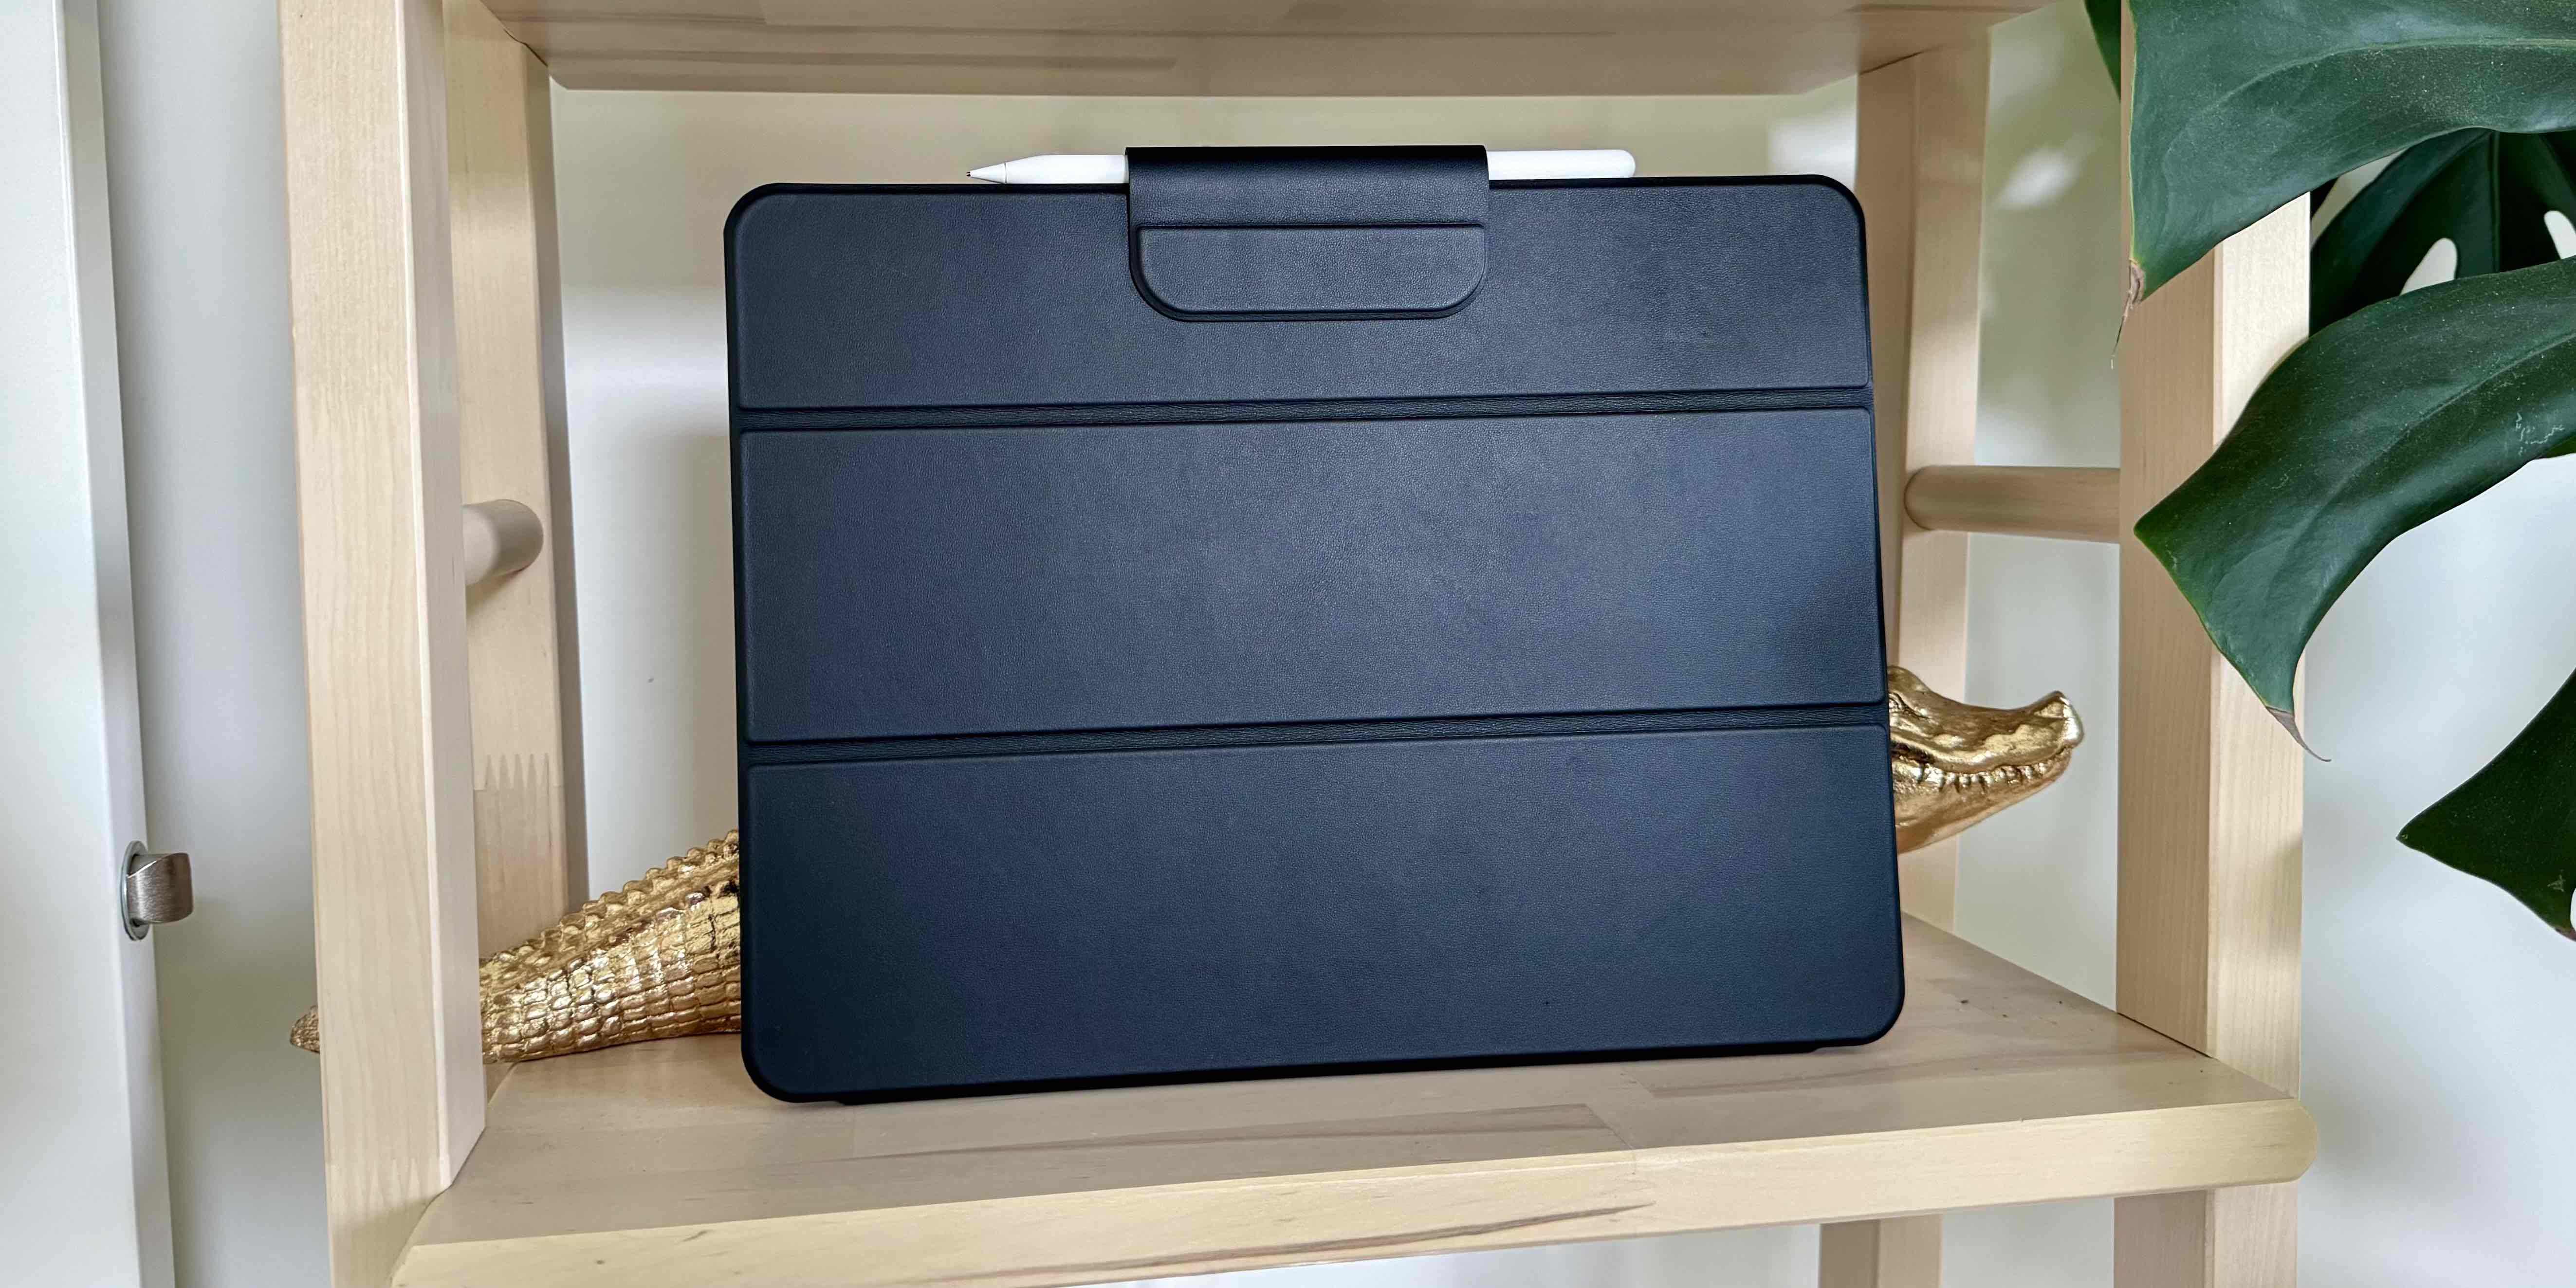 Wish Apples iPad Smart Folio came in leather? Nomads got you covered